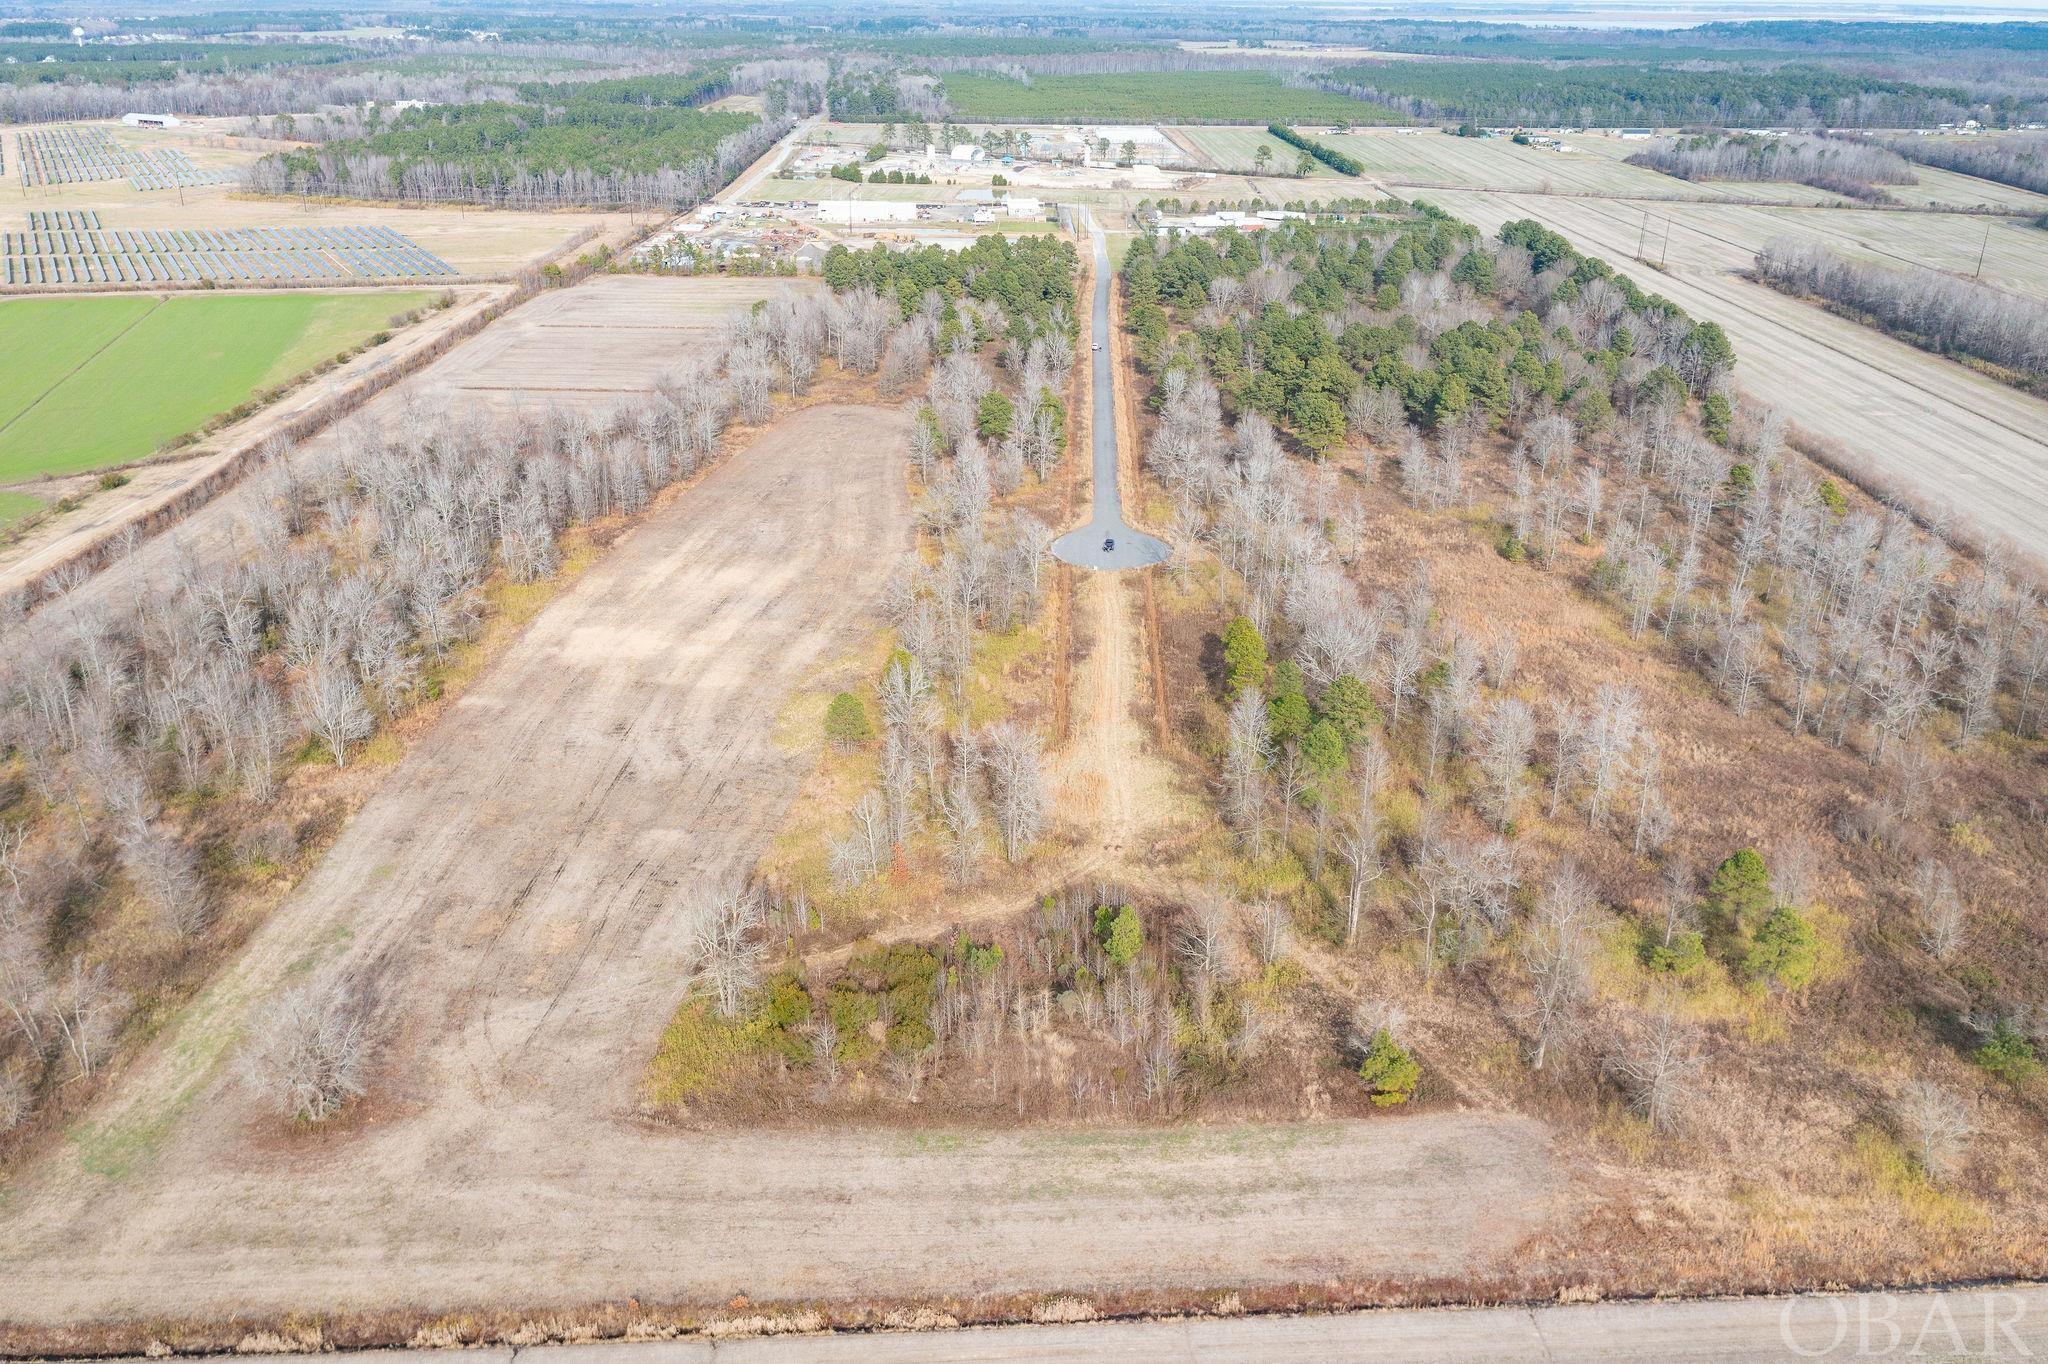 TBD Windchaser Way, Moyock, NC 27958, ,Lots/land,For sale,Windchaser Way,124664